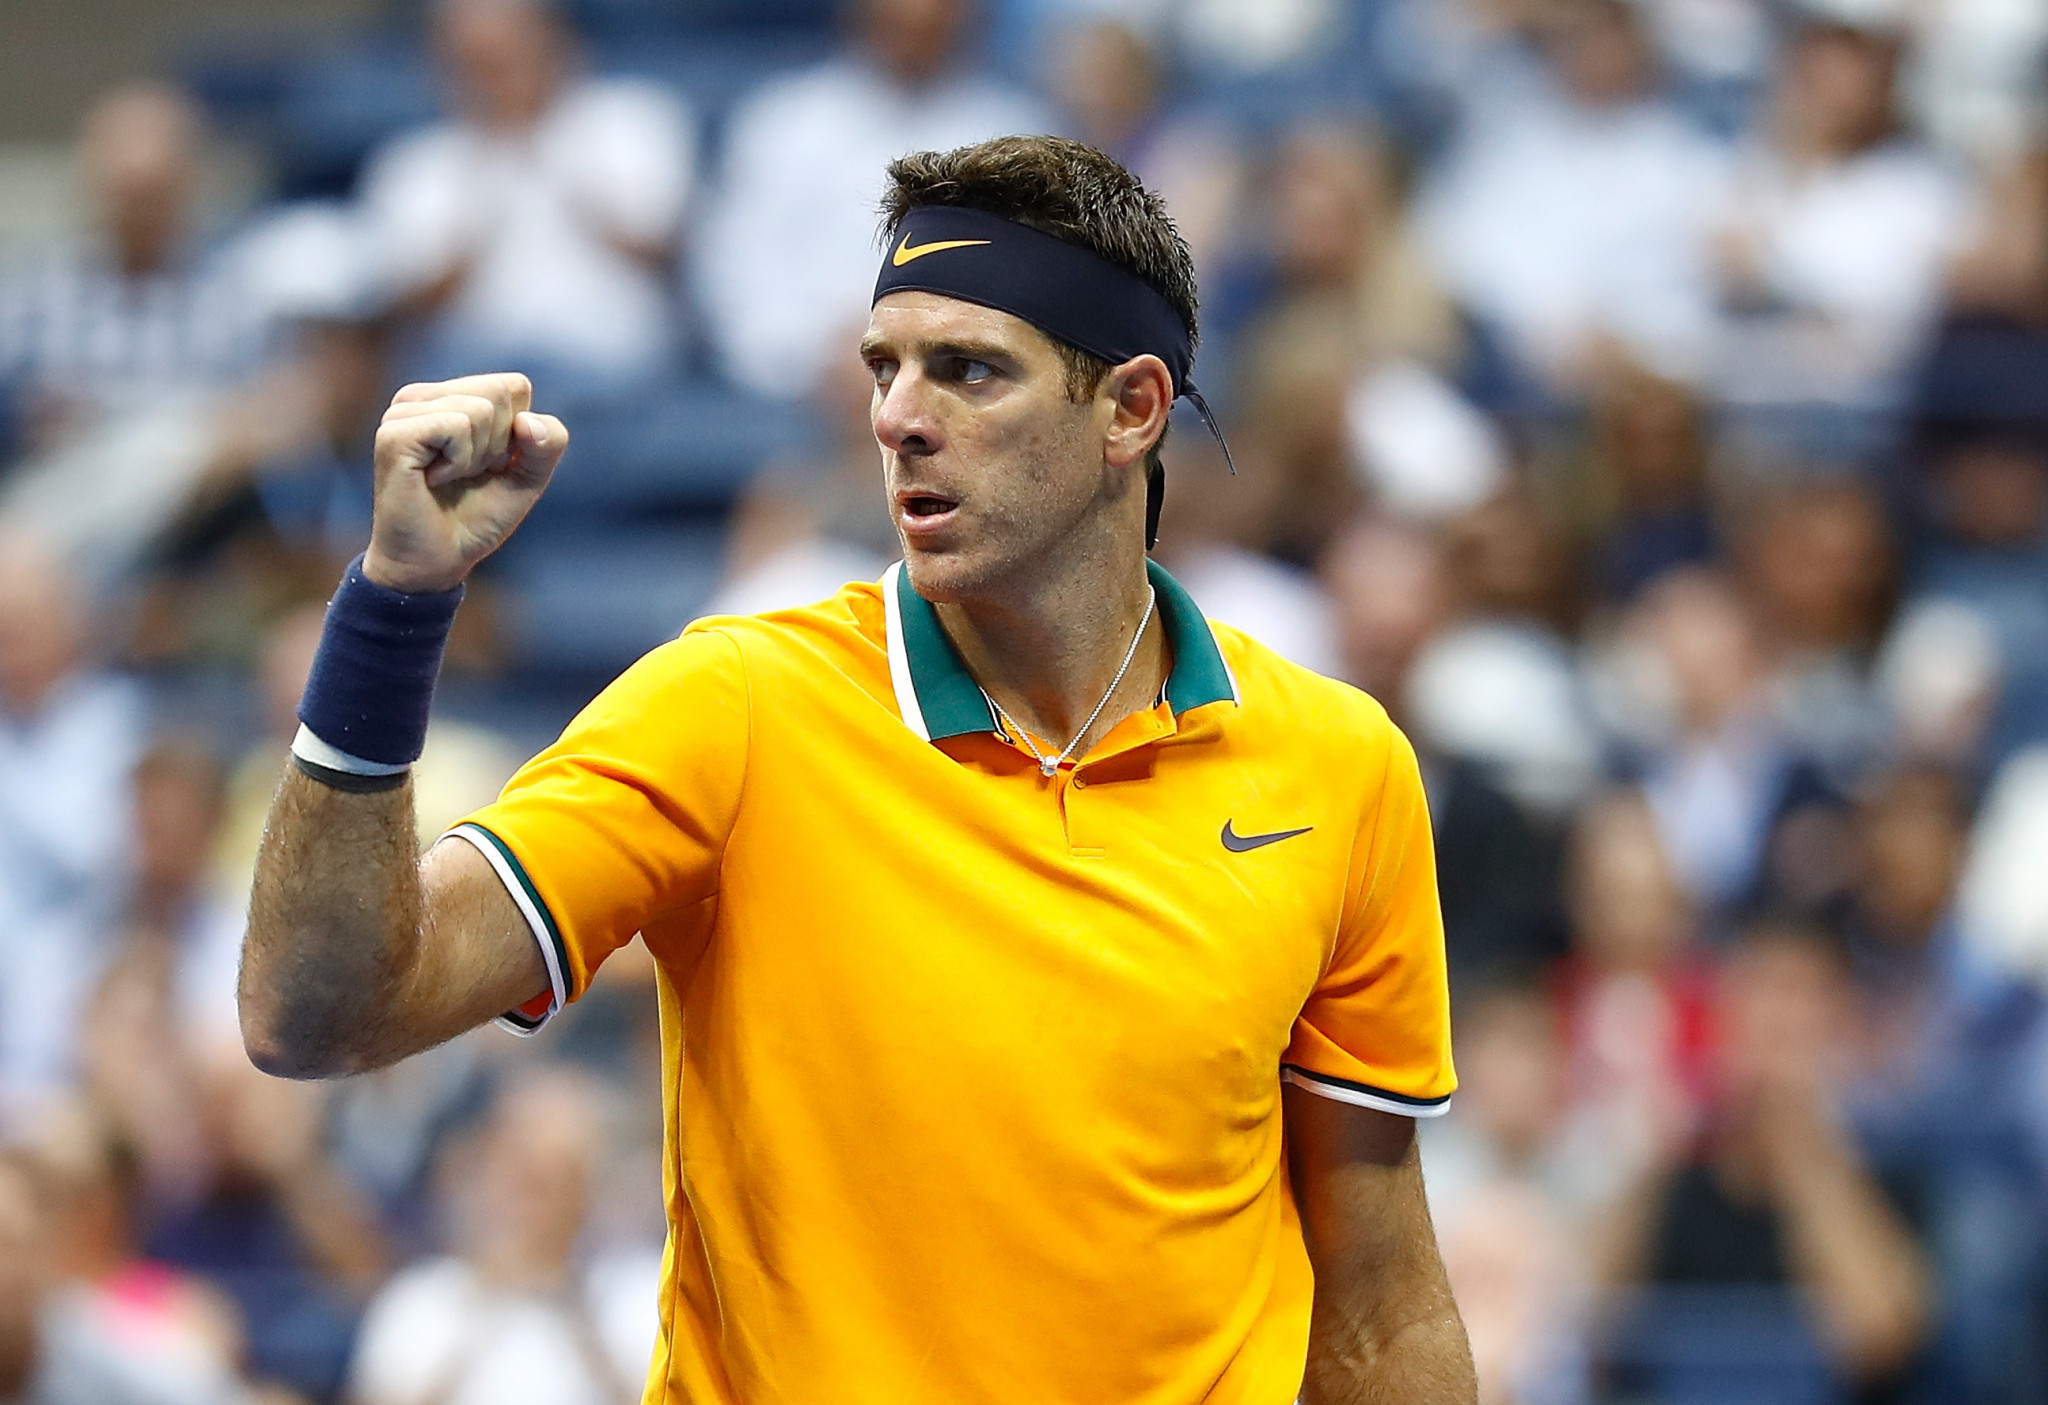 Del Potro through to US Open final as Nadal withdraws injured during semi-final clash